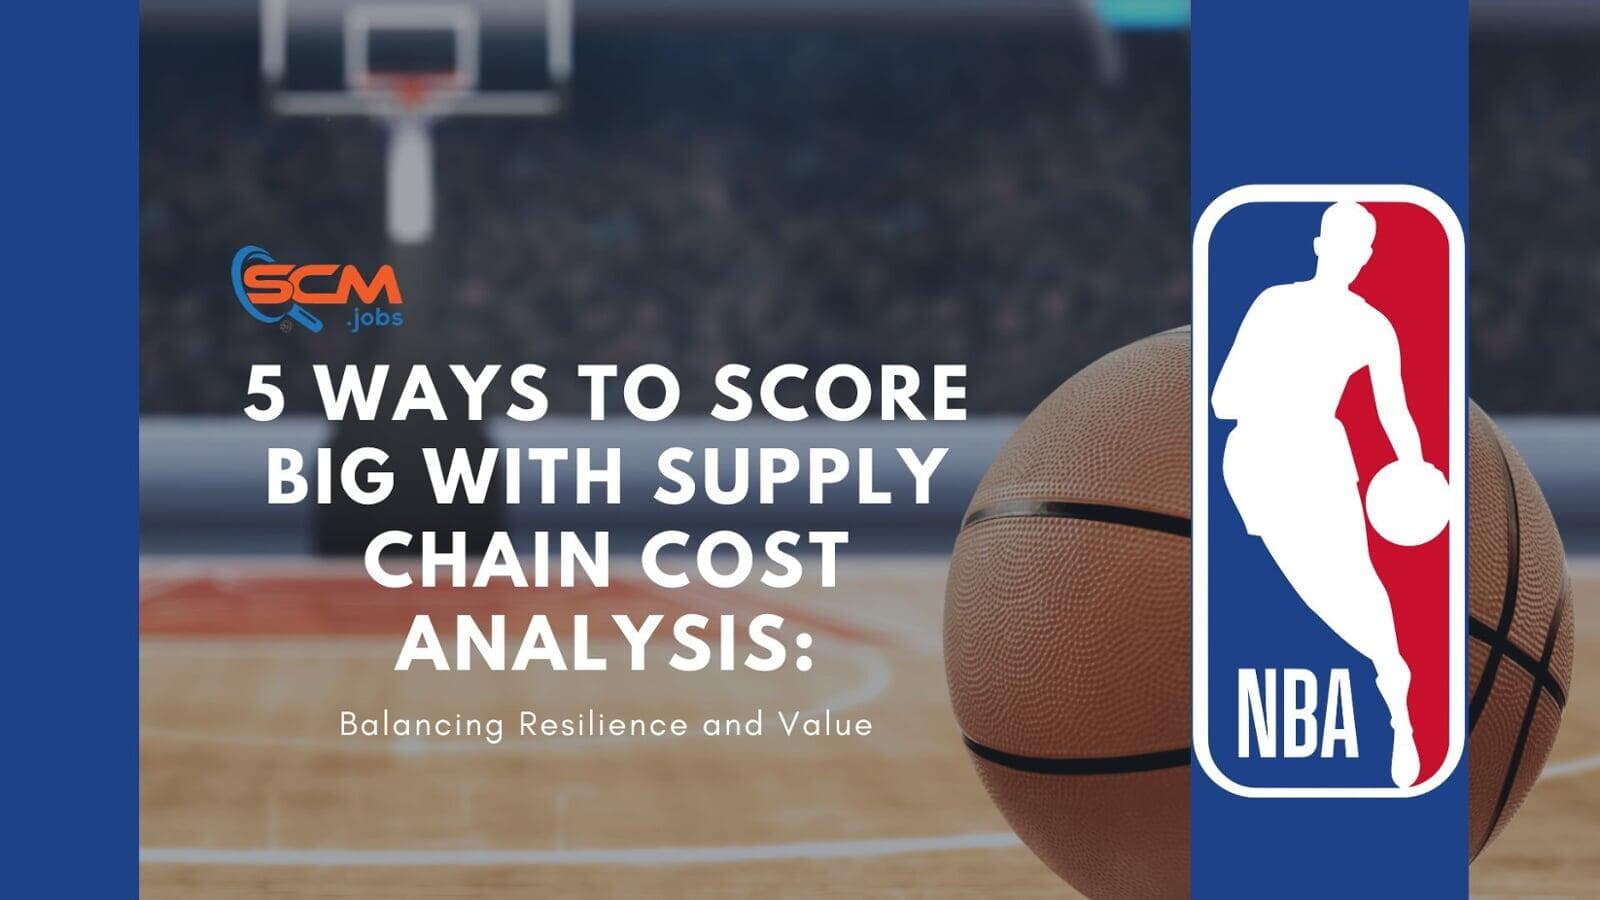 5 Ways to Score Big with Supply Chain Cost Analysis: Balancing Resilience and Value